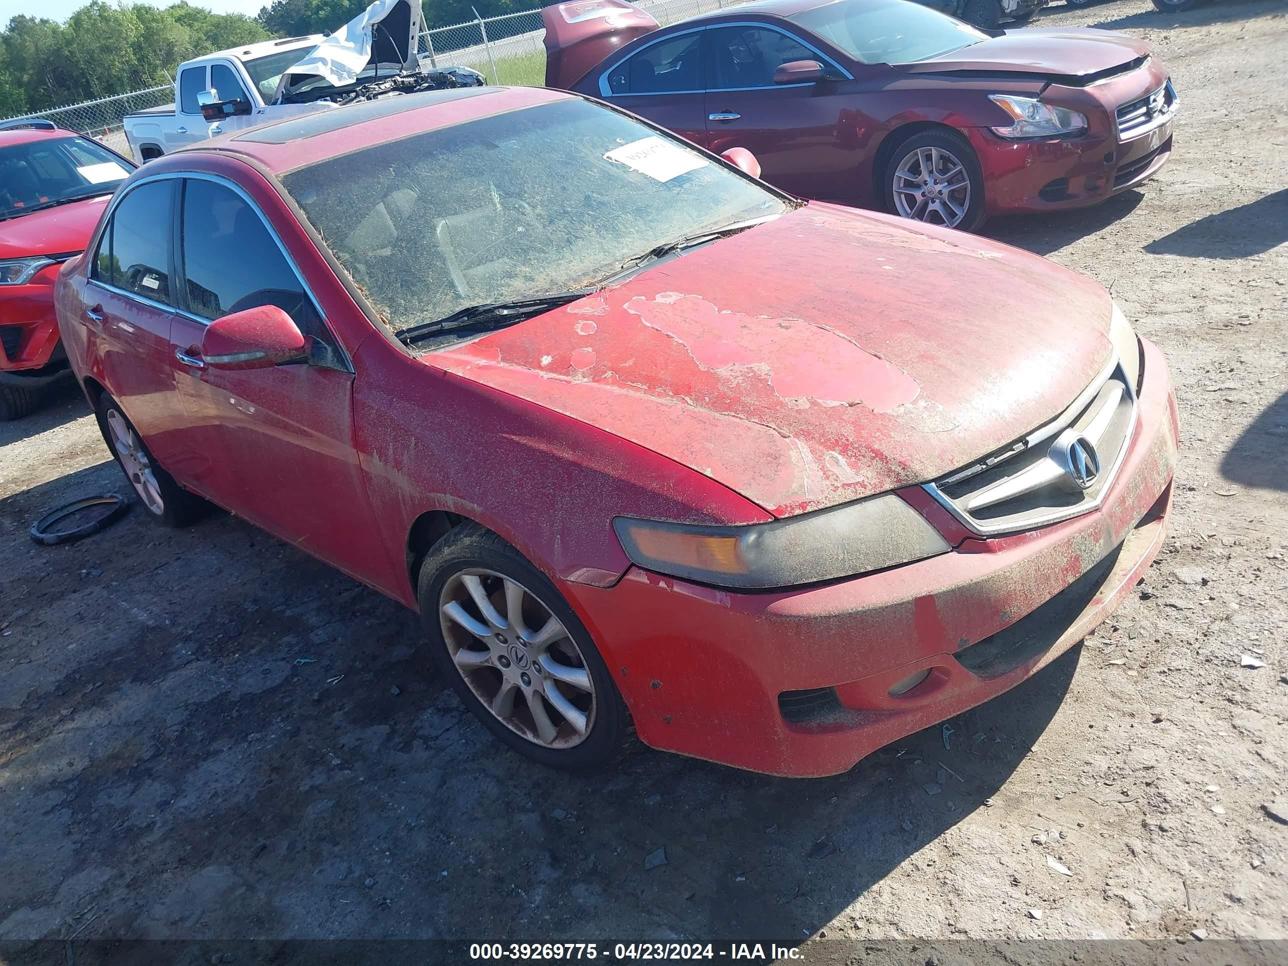 vin: JH4CL96998C019654 JH4CL96998C019654 2008 acura tsx 2400 for Sale in 27520, 60 Sadisco Rd, Clayton, North Carolina, USA